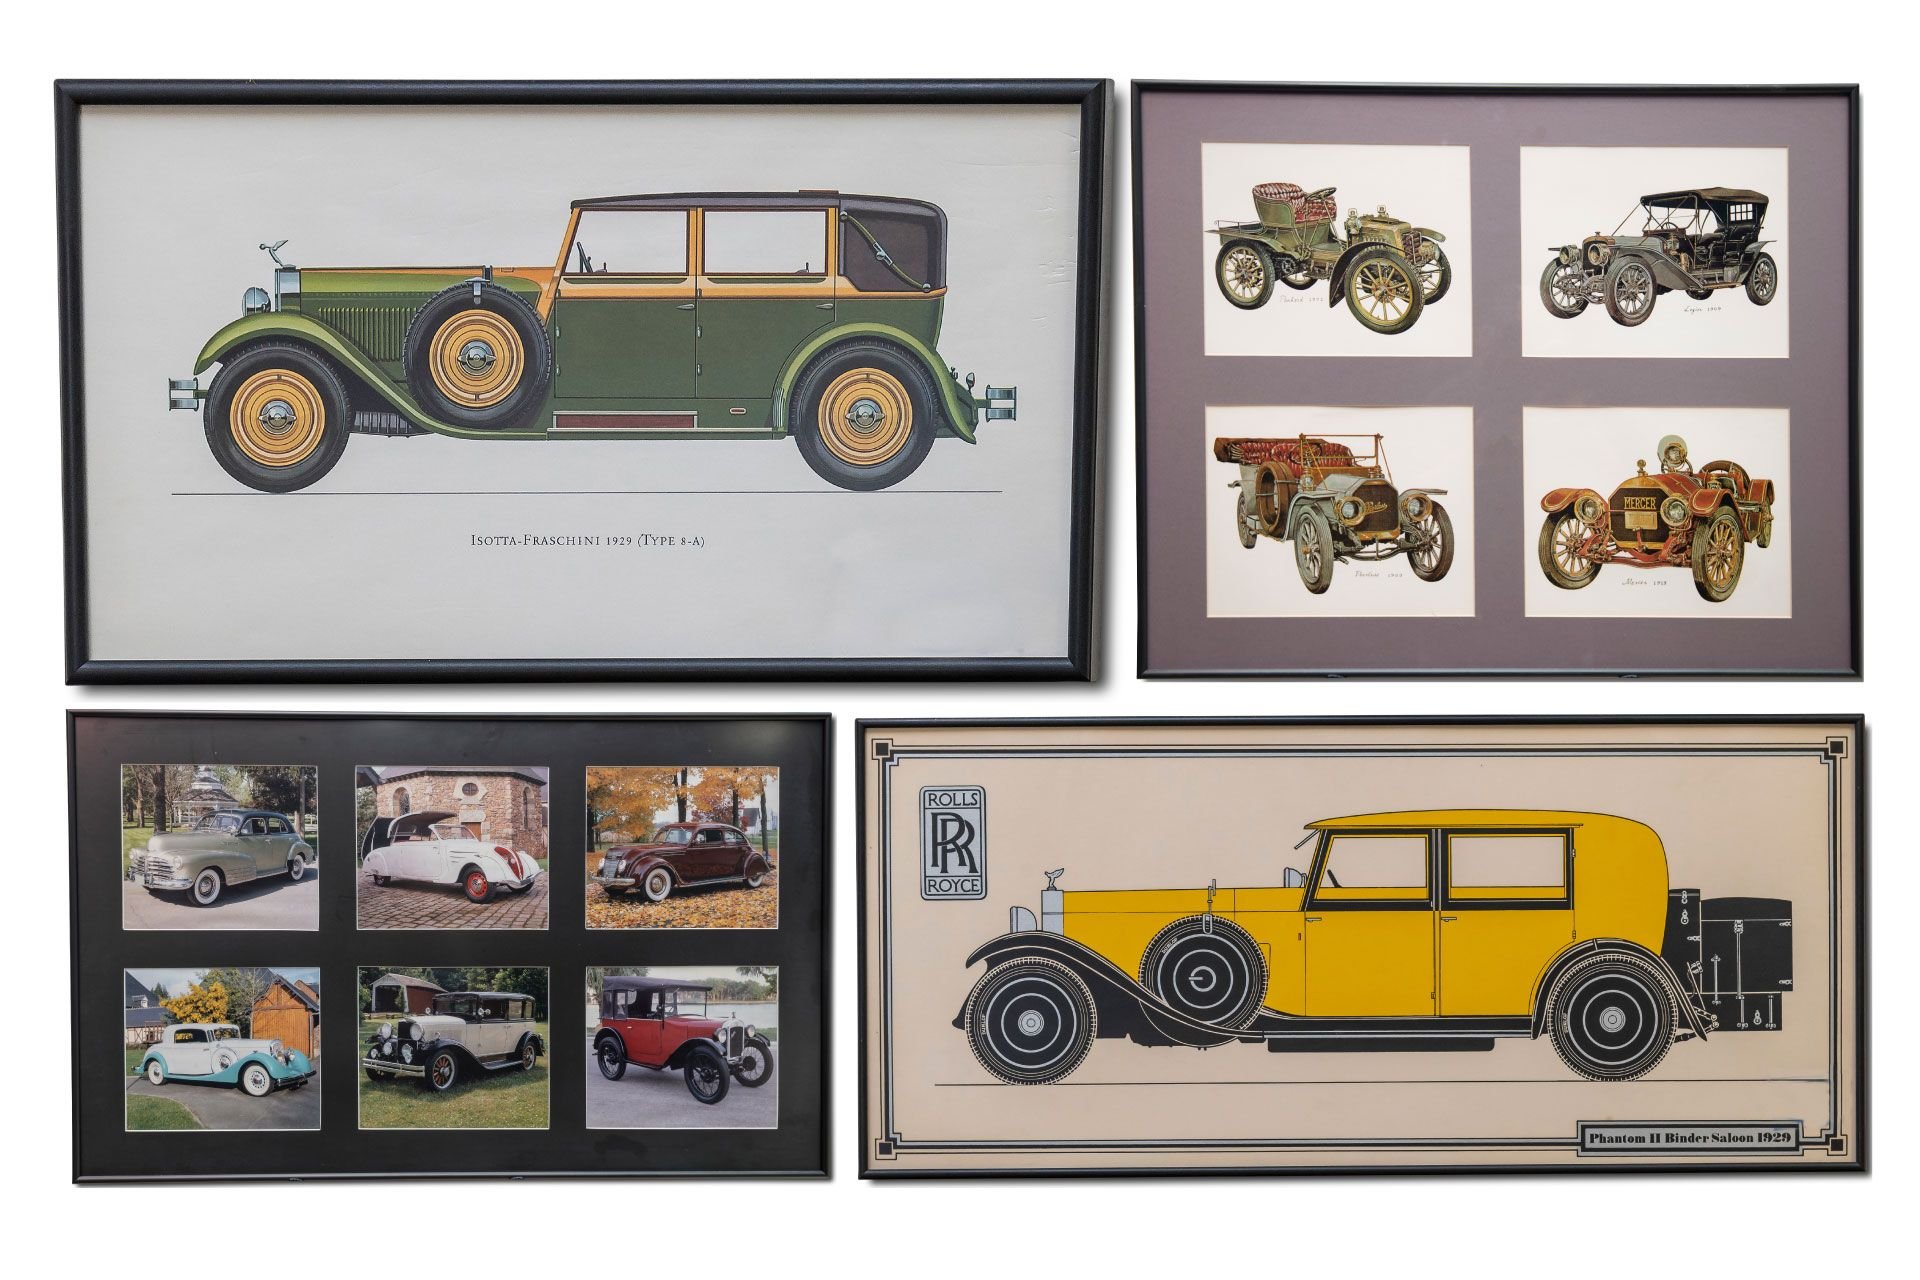 For Sale Group of Automotive Illustrations, Posters, and Photos